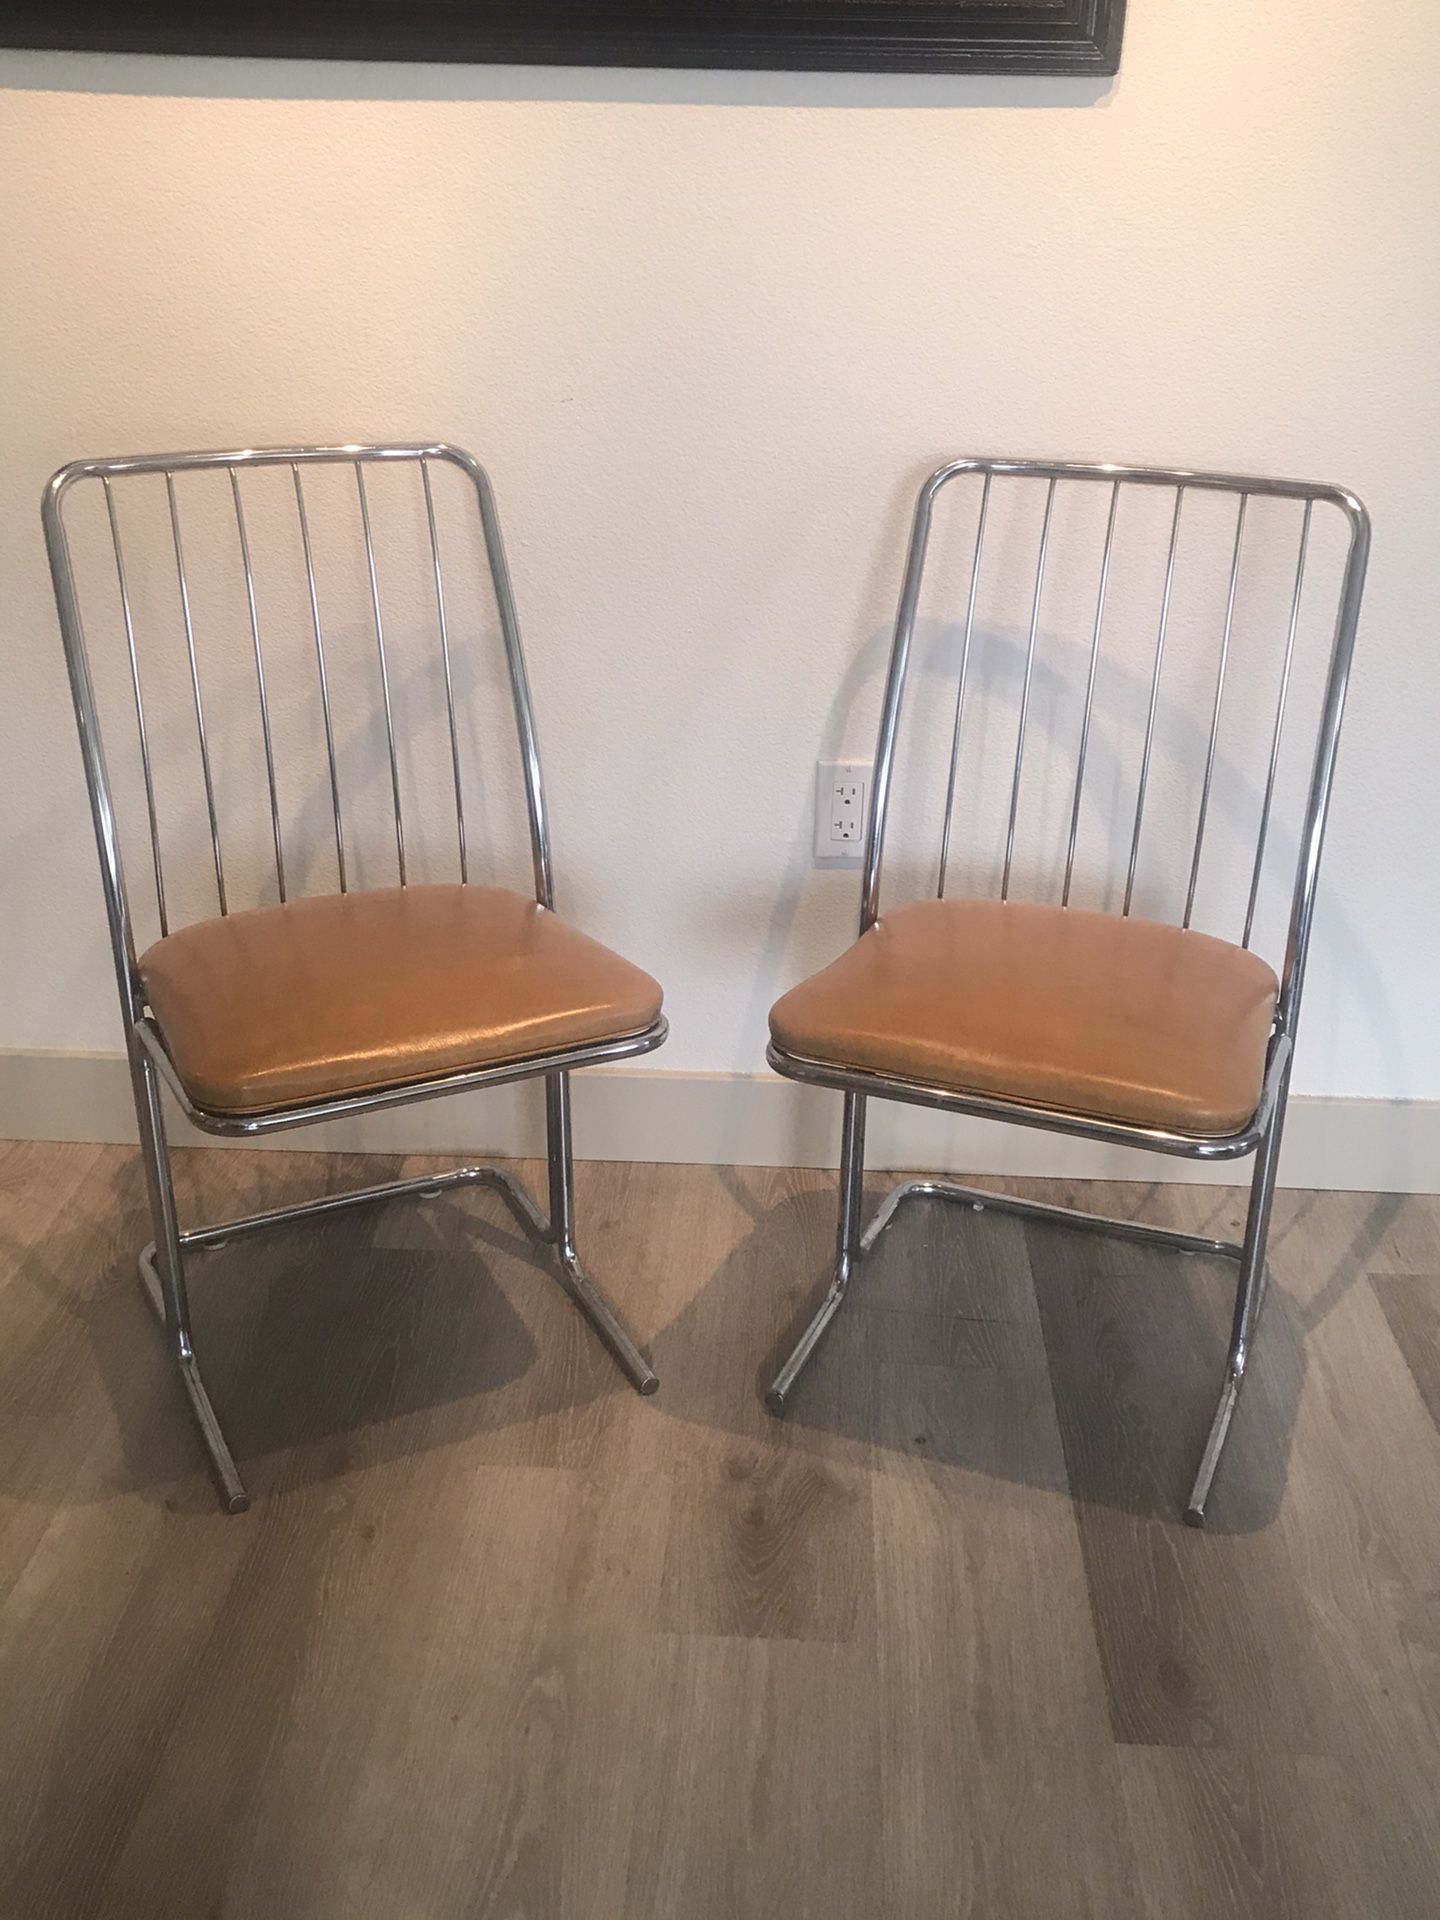 (2/both) Kitchen chairs by Daystrom